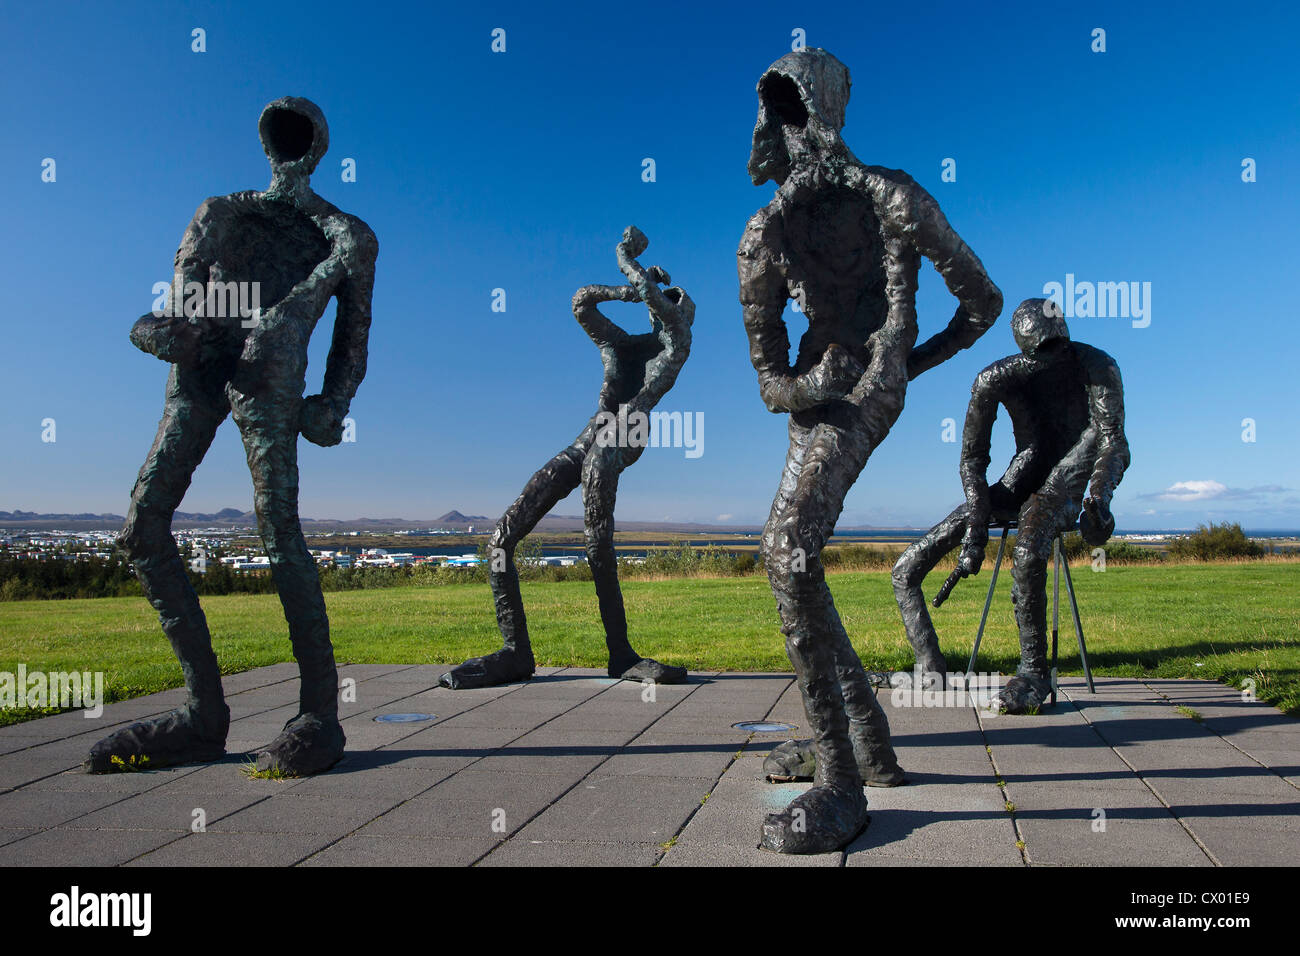 Sculpture of figures playing musical instruments, outside the Perlan, Reykjavik, Iceland Stock Photo